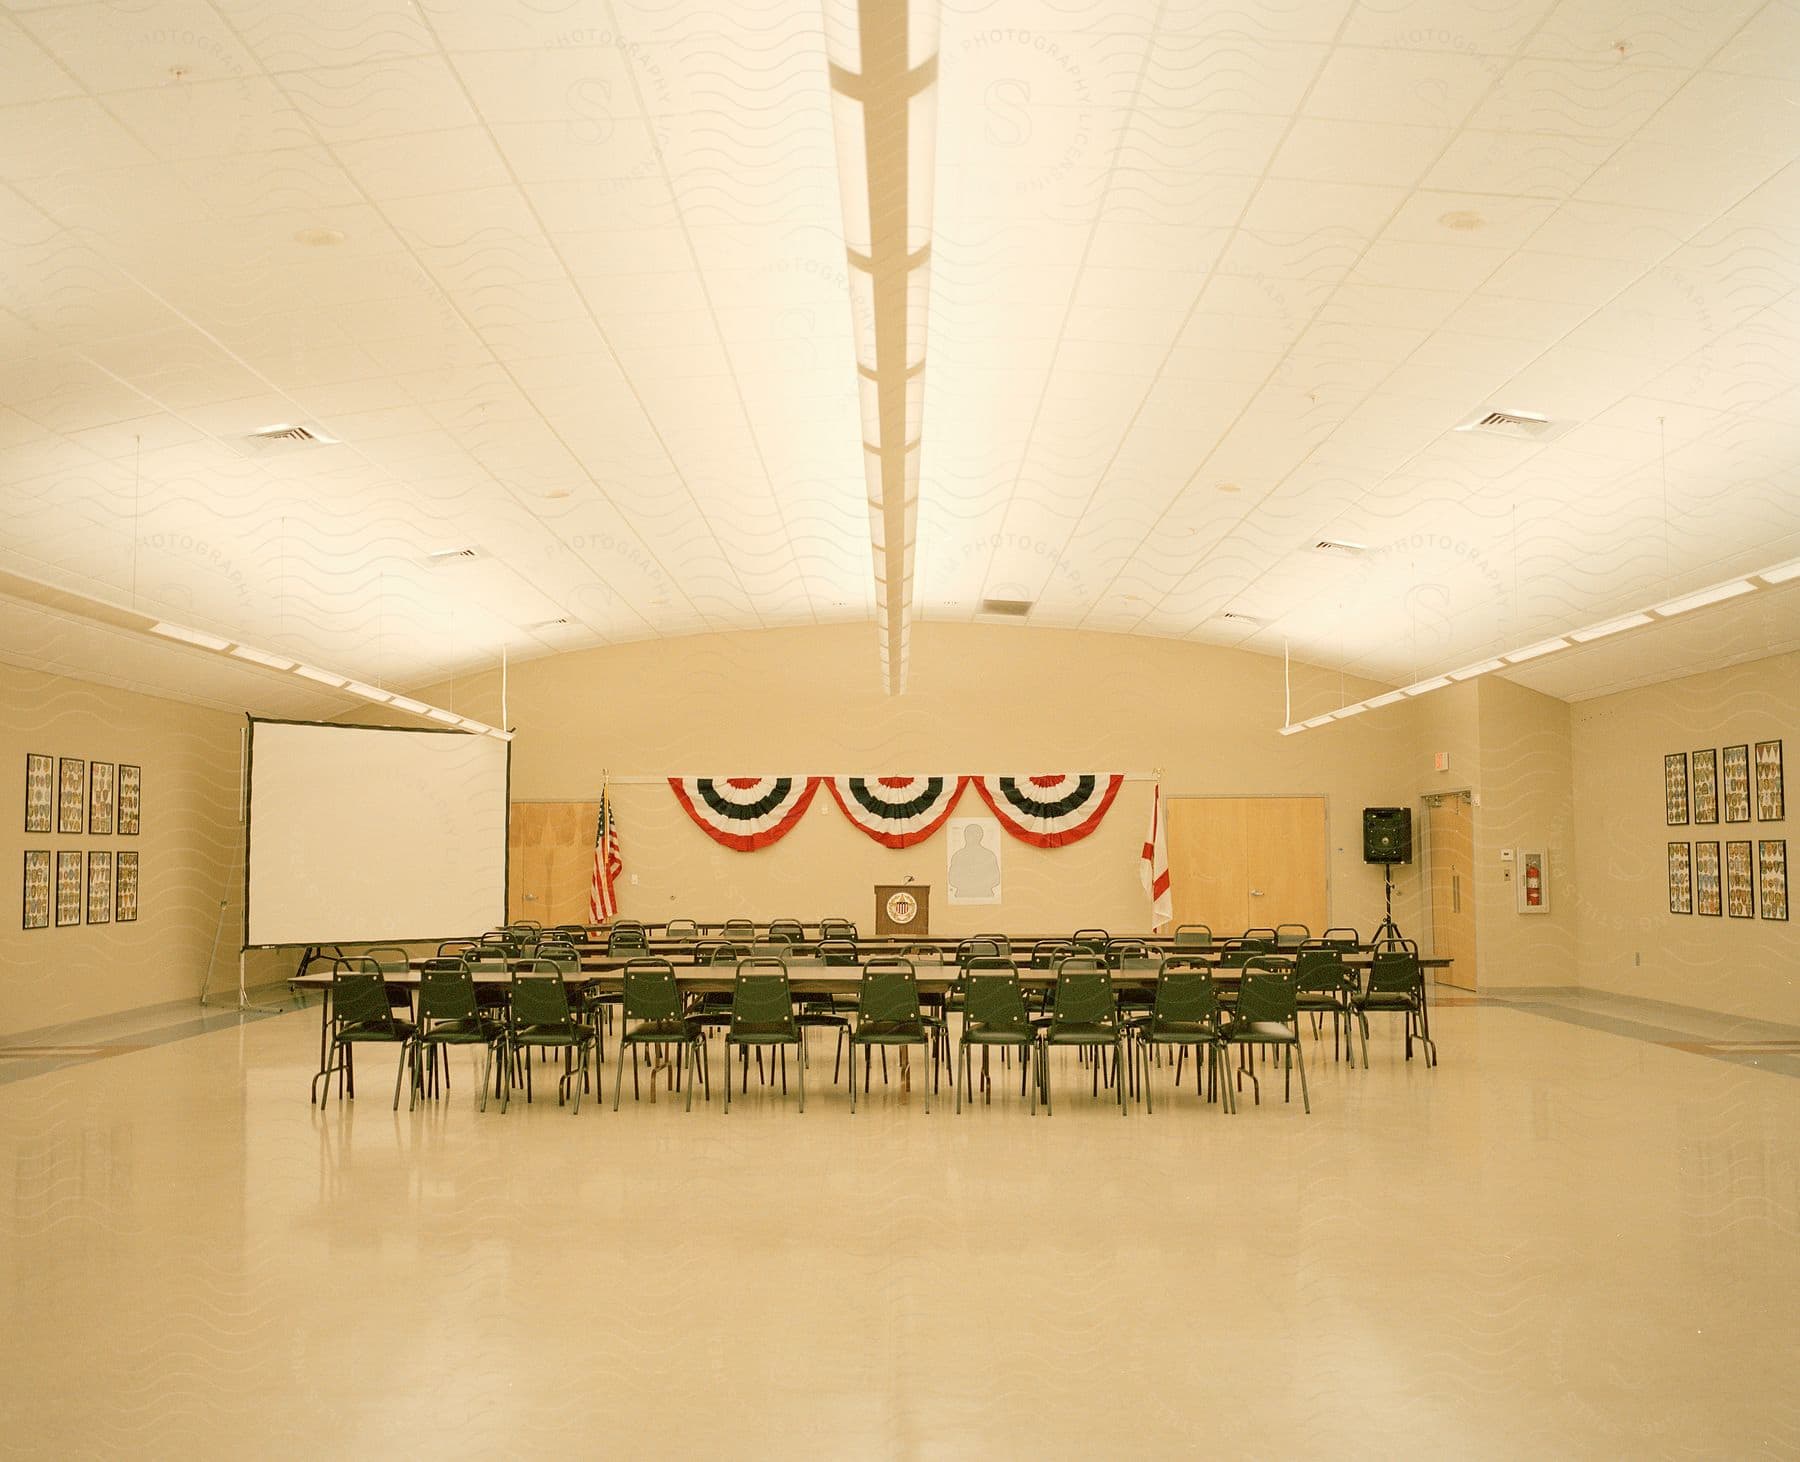 A room set up for a meeting possibly a political gathering with american flags and a blank screen